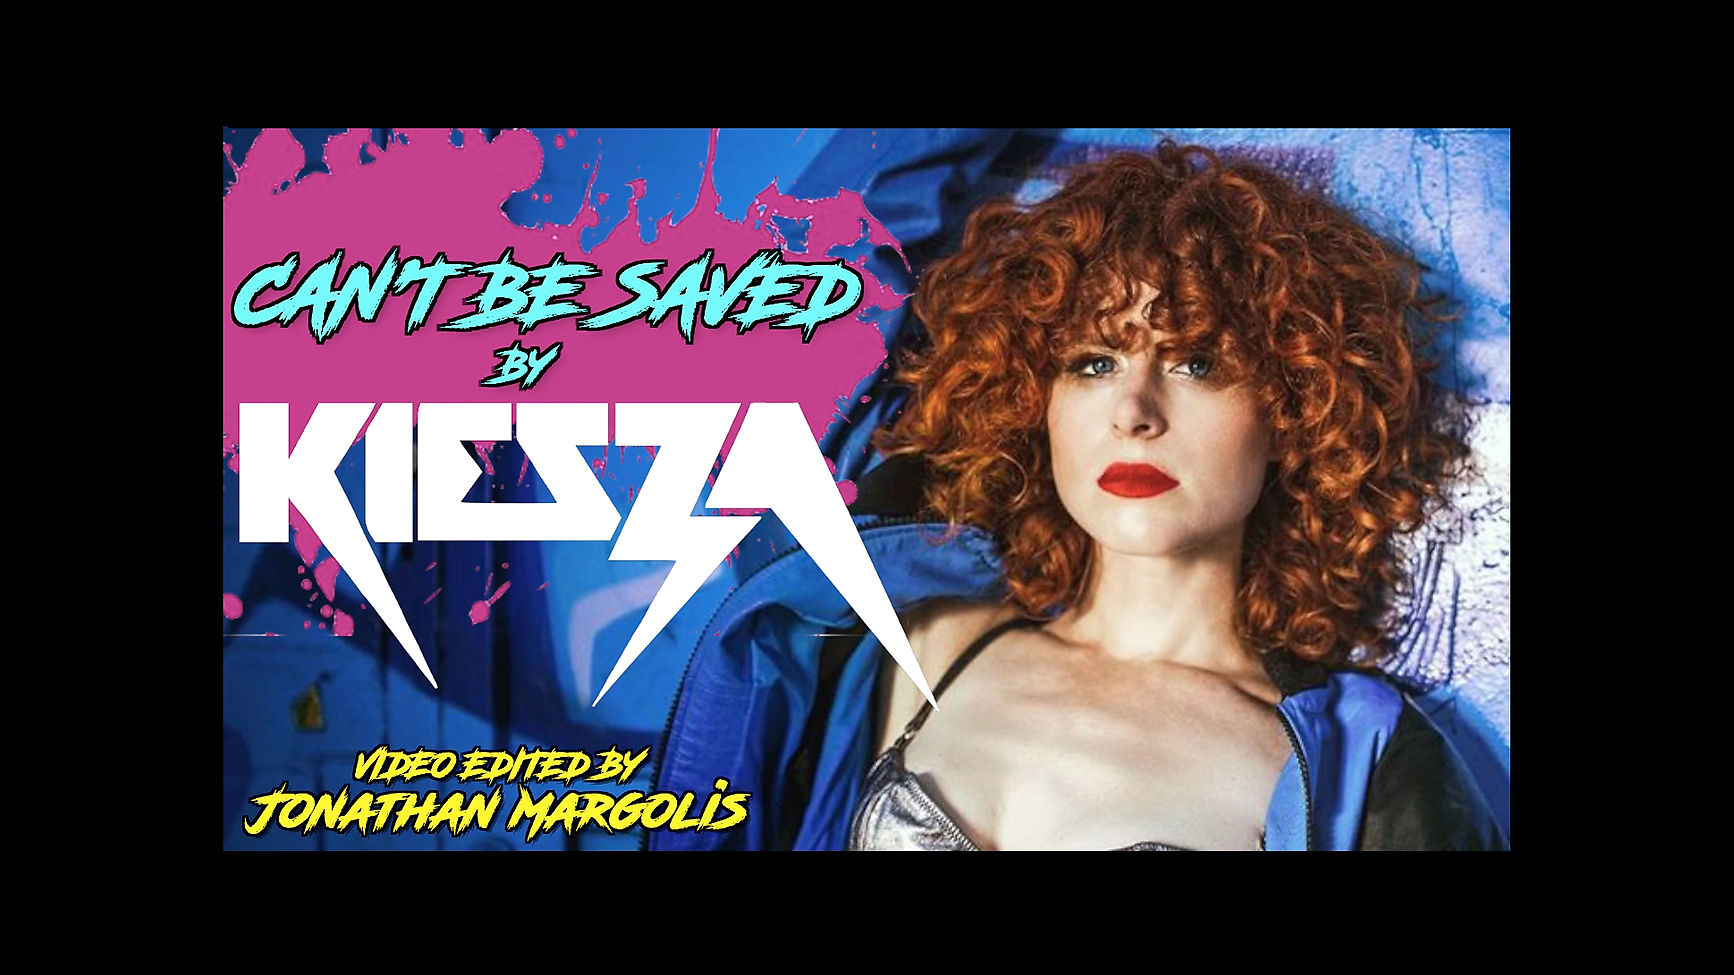 "Cant Be Saved" by Kiesza